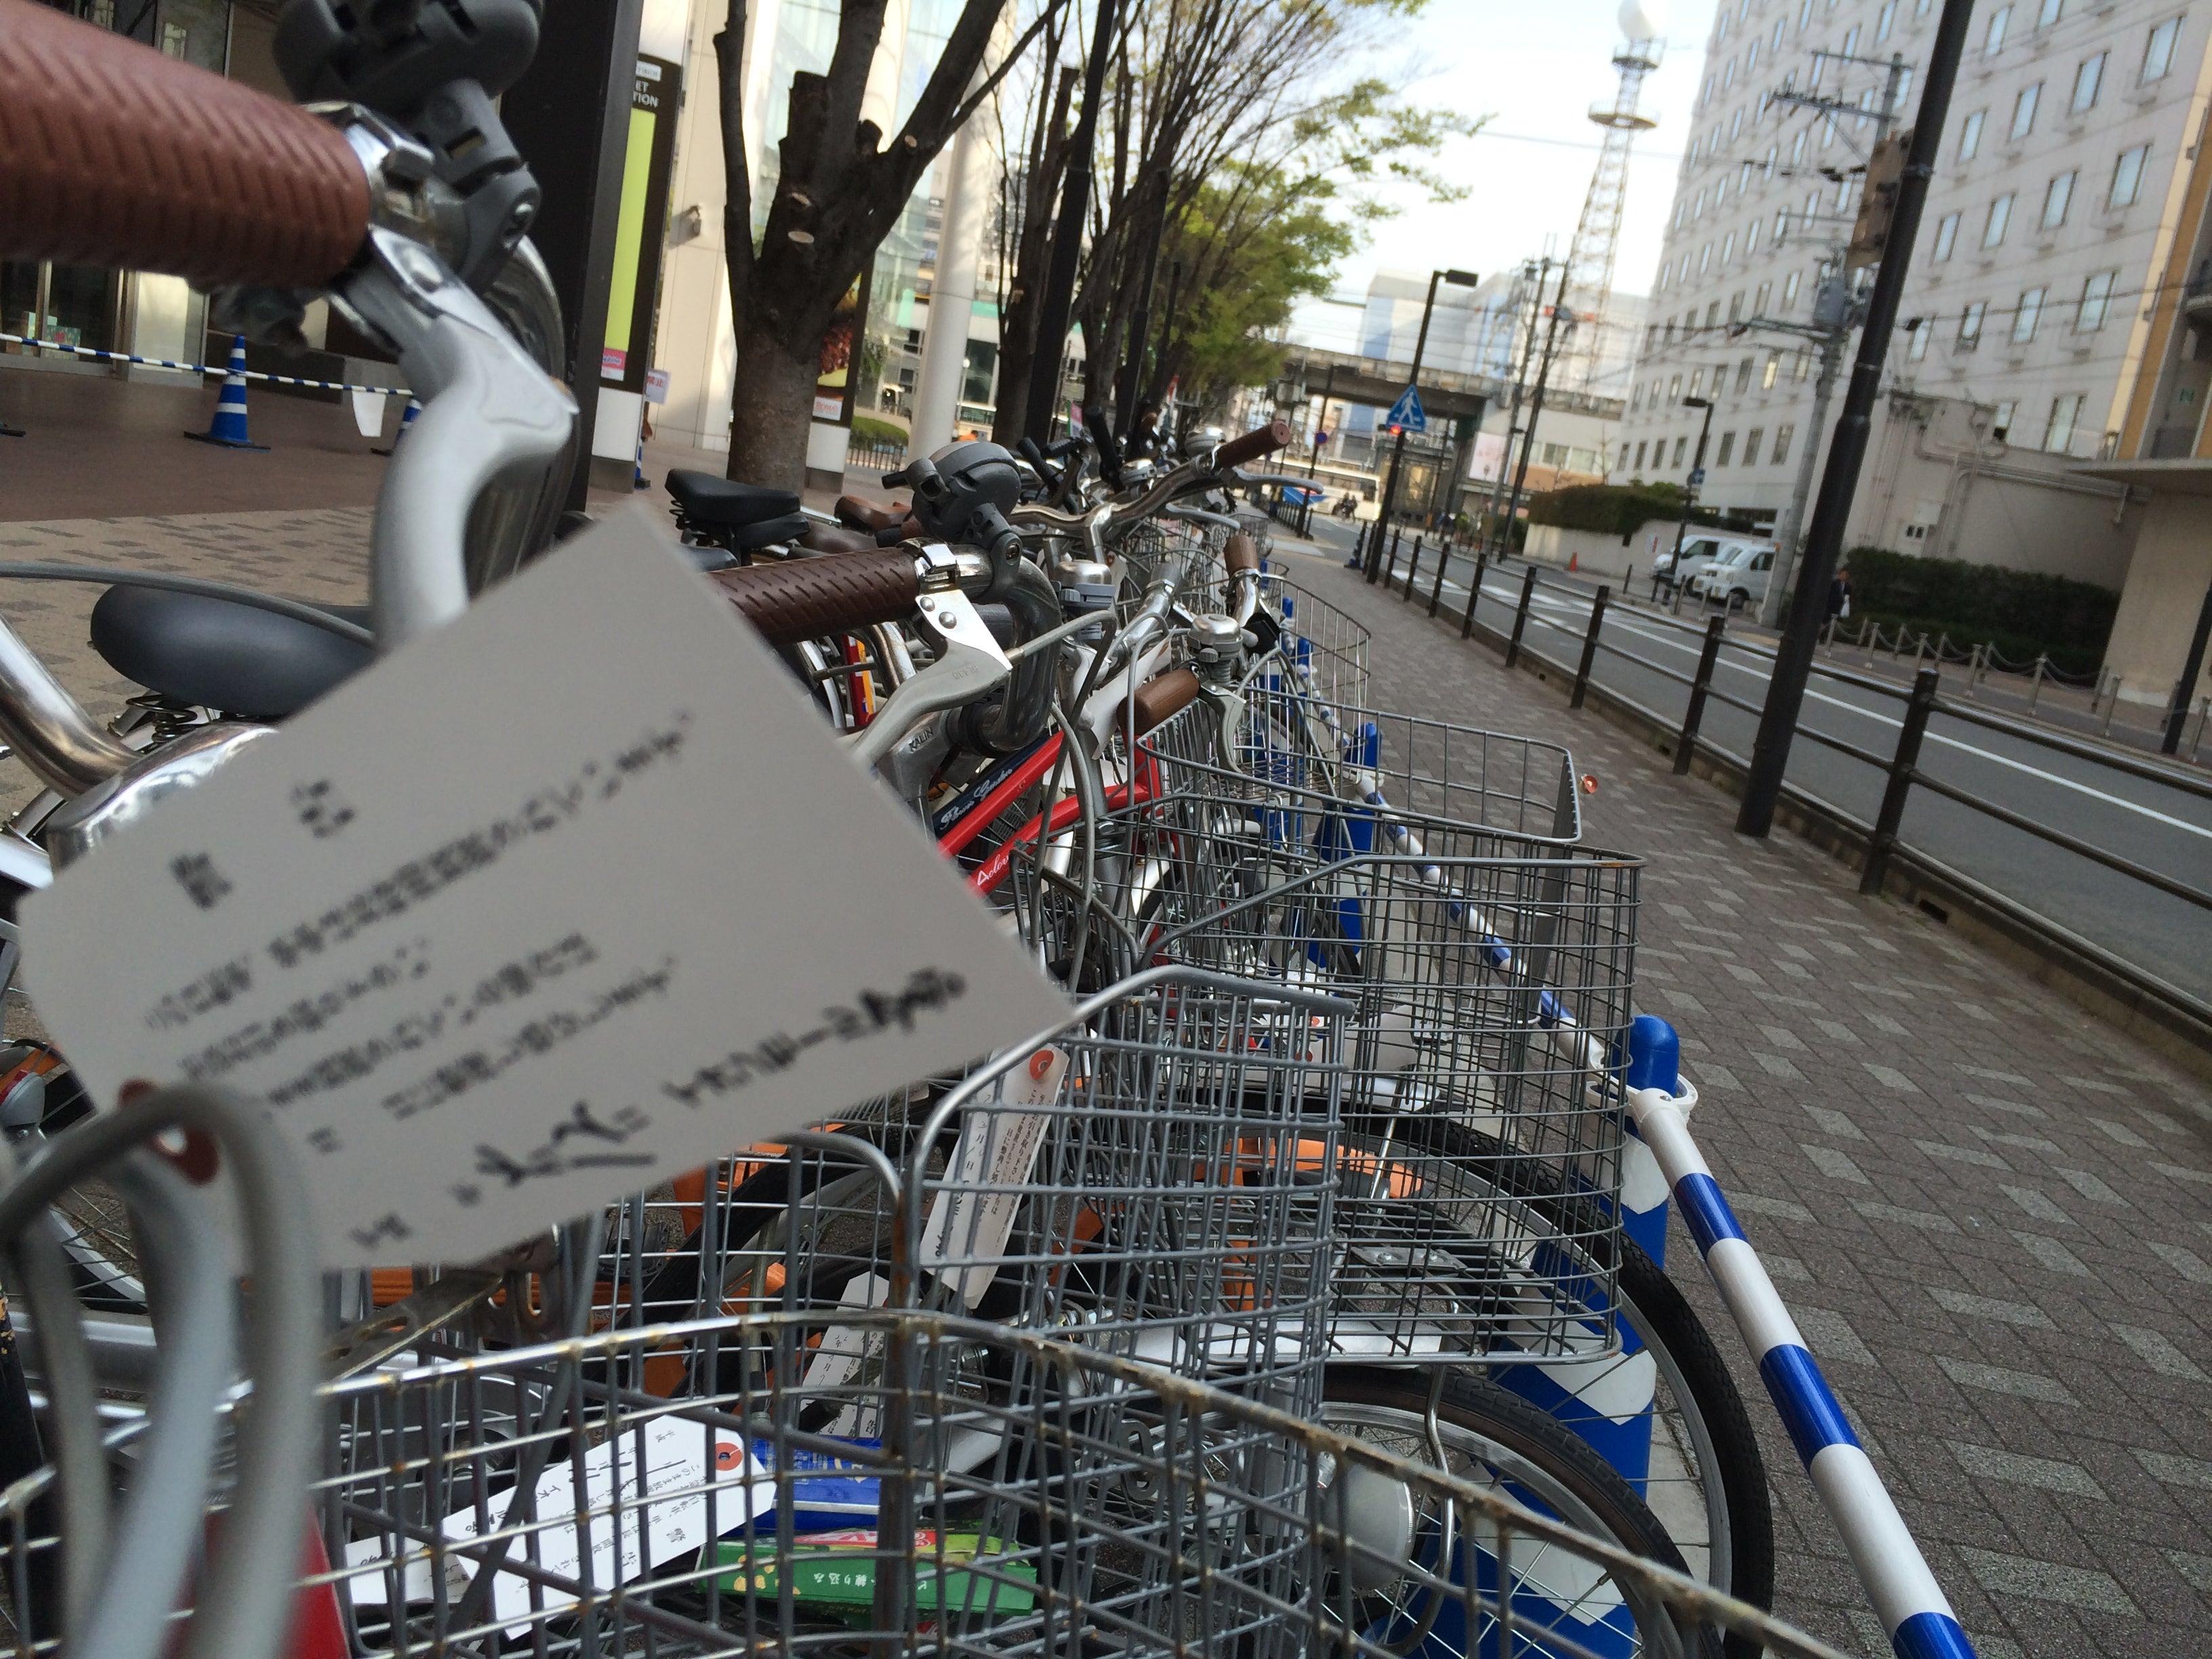 Bicycle valet parking in front of a shopping mall in downtown Kyoto